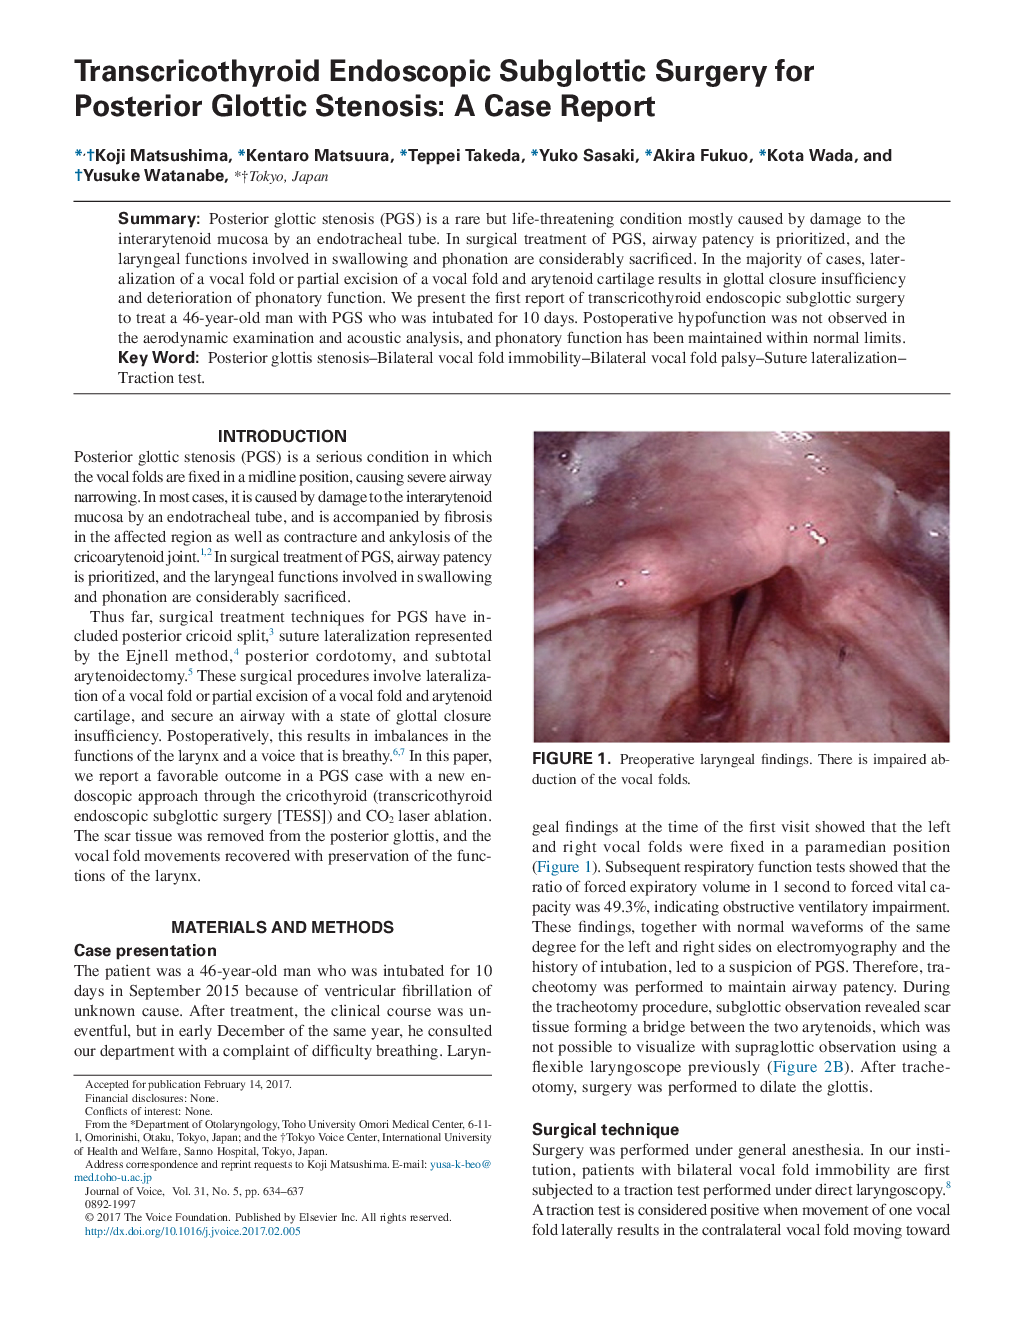 Transcricothyroid Endoscopic Subglottic Surgery for Posterior Glottic Stenosis: A Case Report